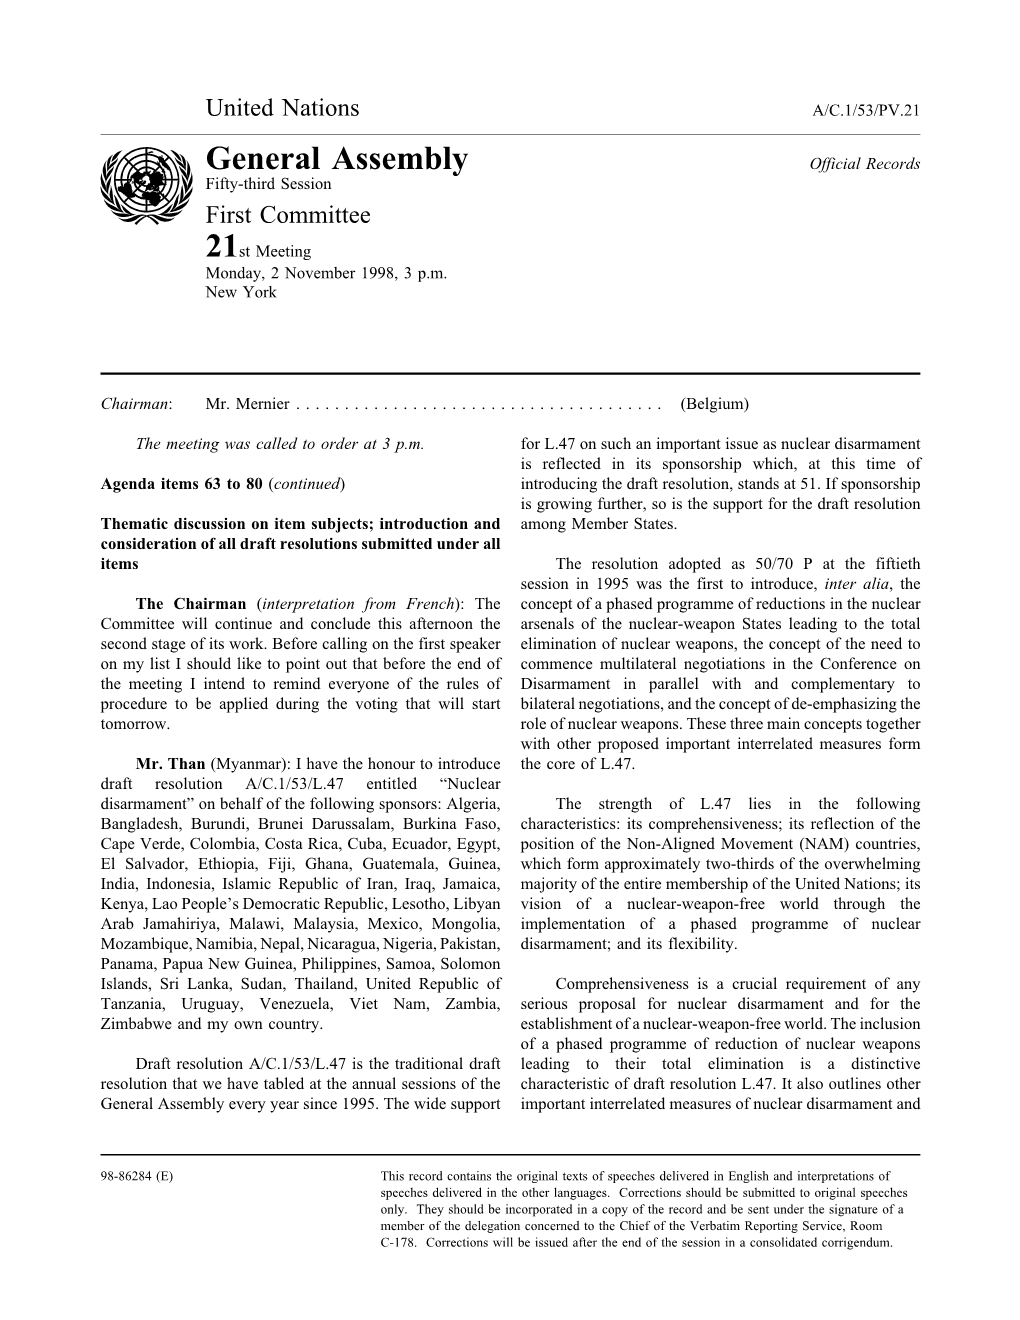 General Assembly Official Records Fifty-Third Session First Committee 21St Meeting Monday, 2 November 1998, 3 P.M